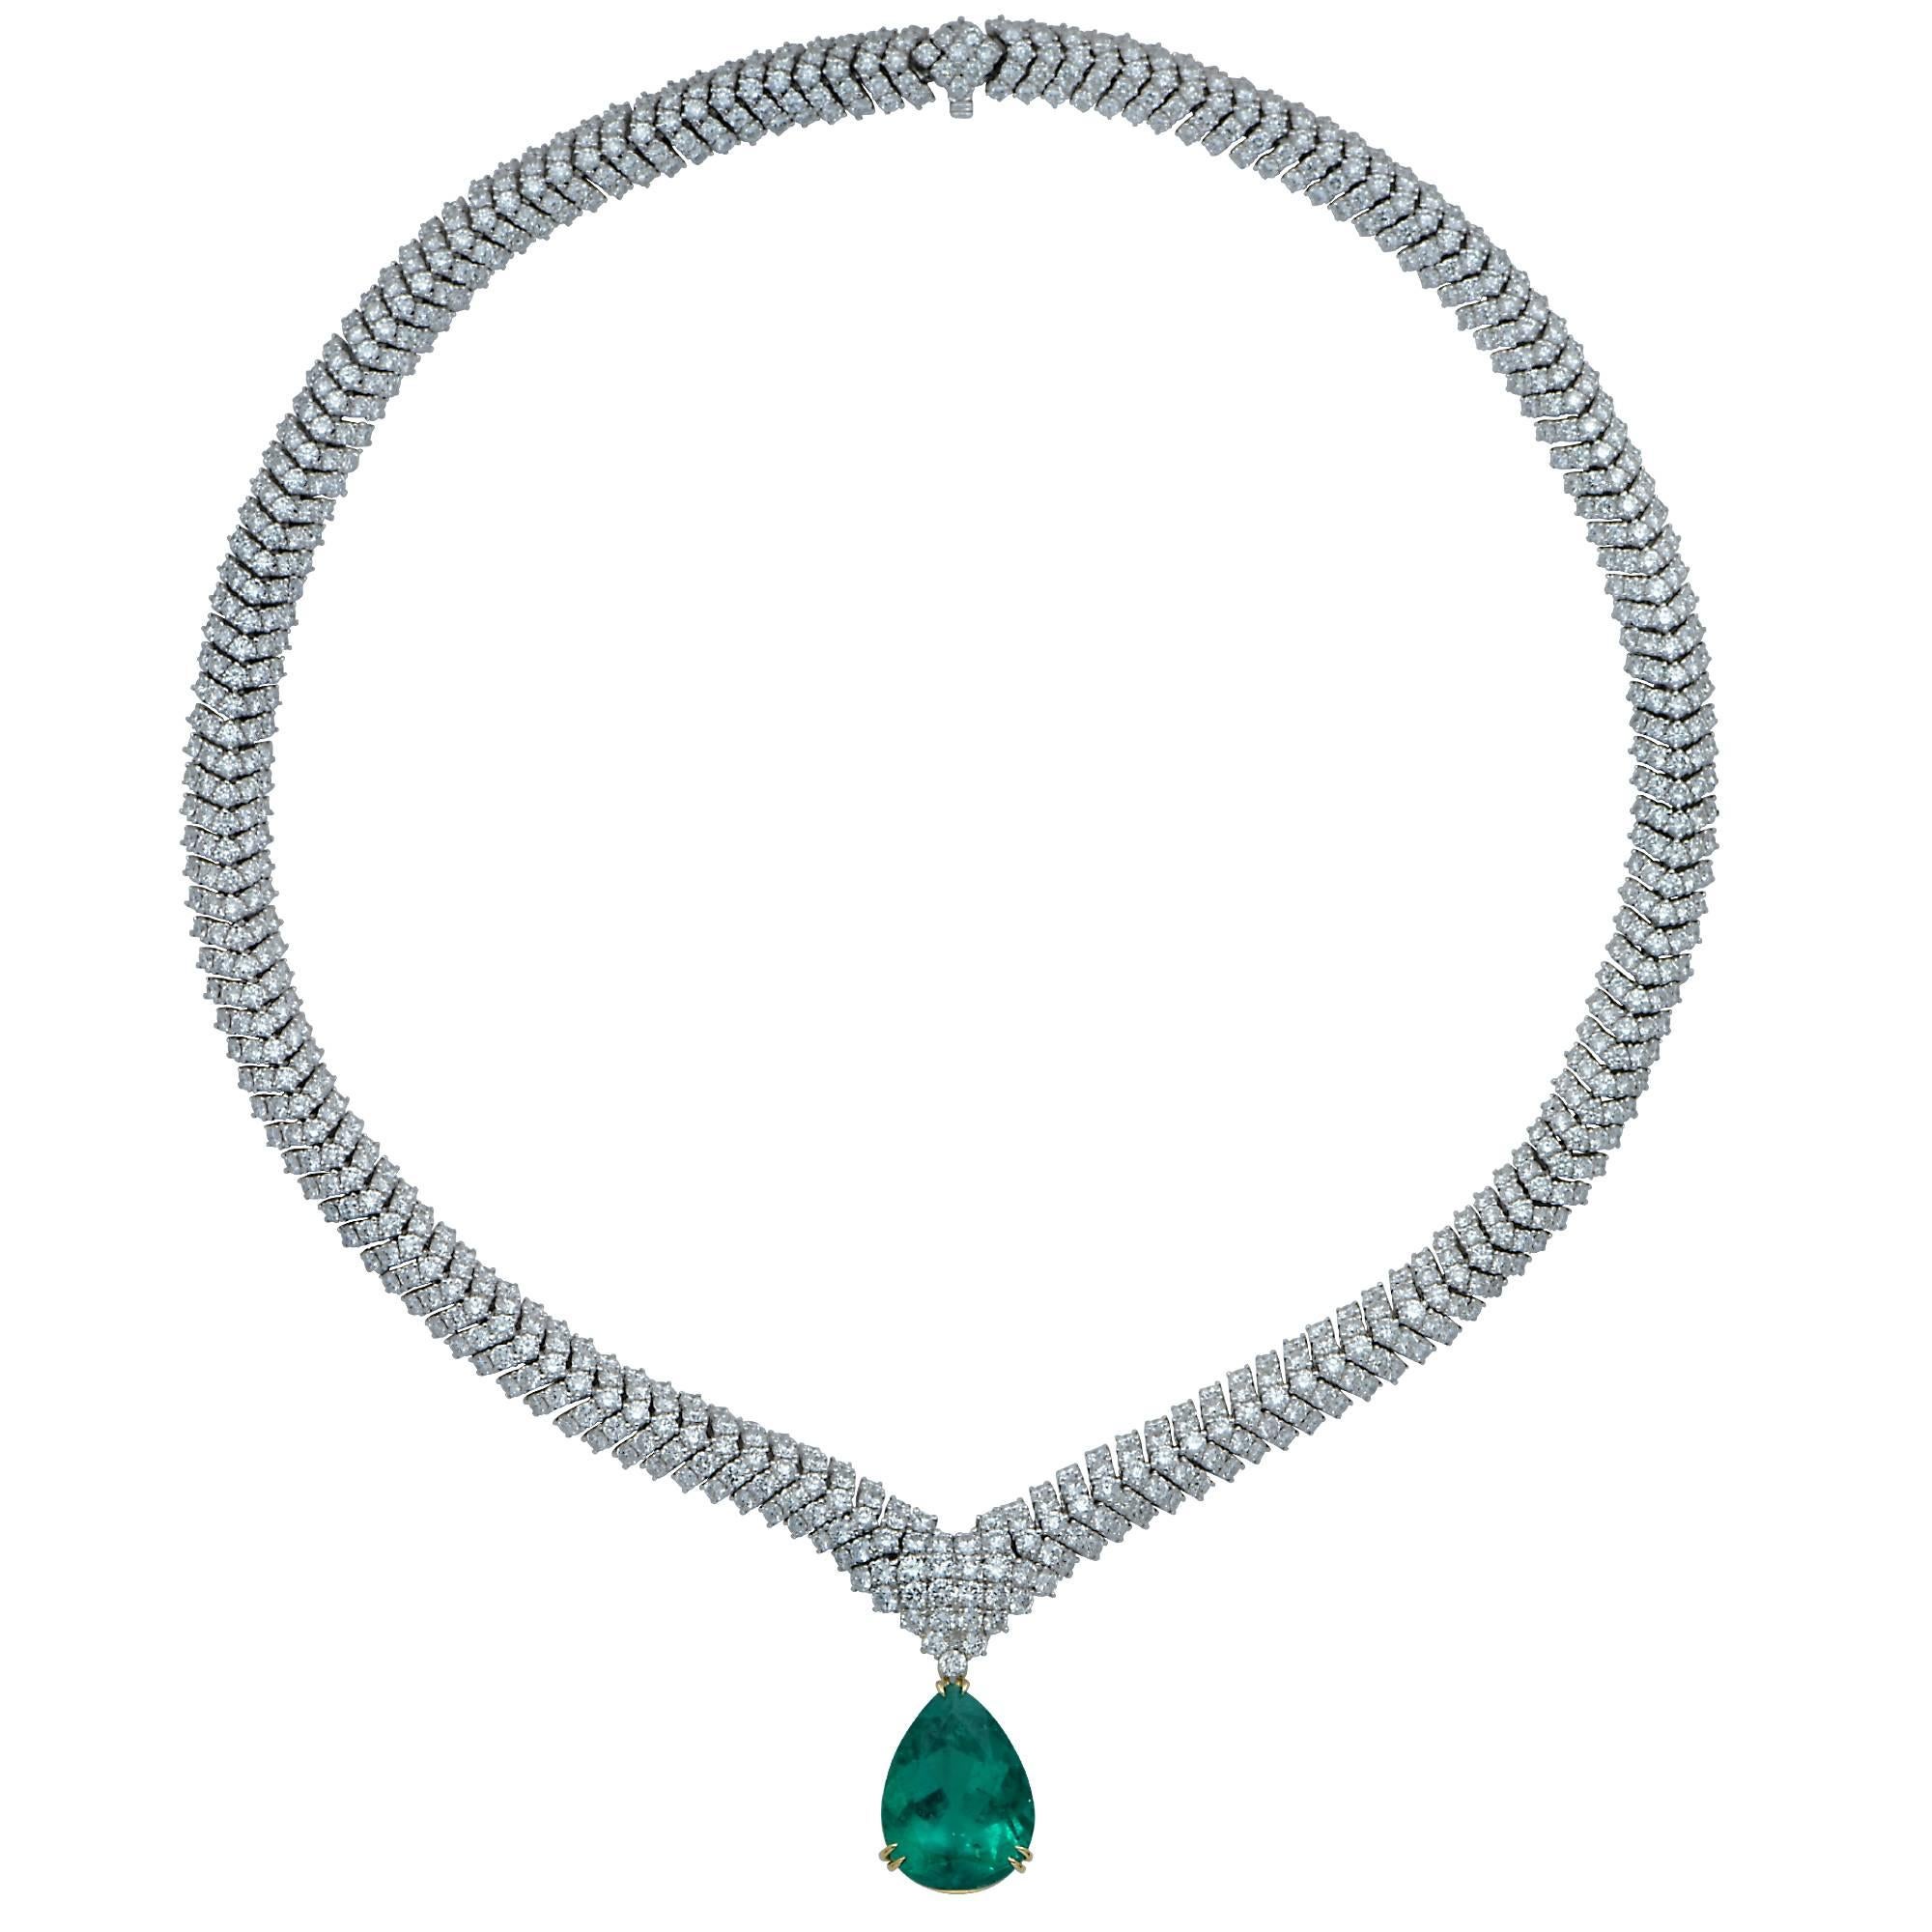 A magnificent 10.40ct rare Colombian Emerald, AGL certified, suspended from an elegant 18K white gold necklace containing 28.80cts of round brilliant cut diamonds F-G color and VS clarity. This vibrant emerald is removable making this breathtaking